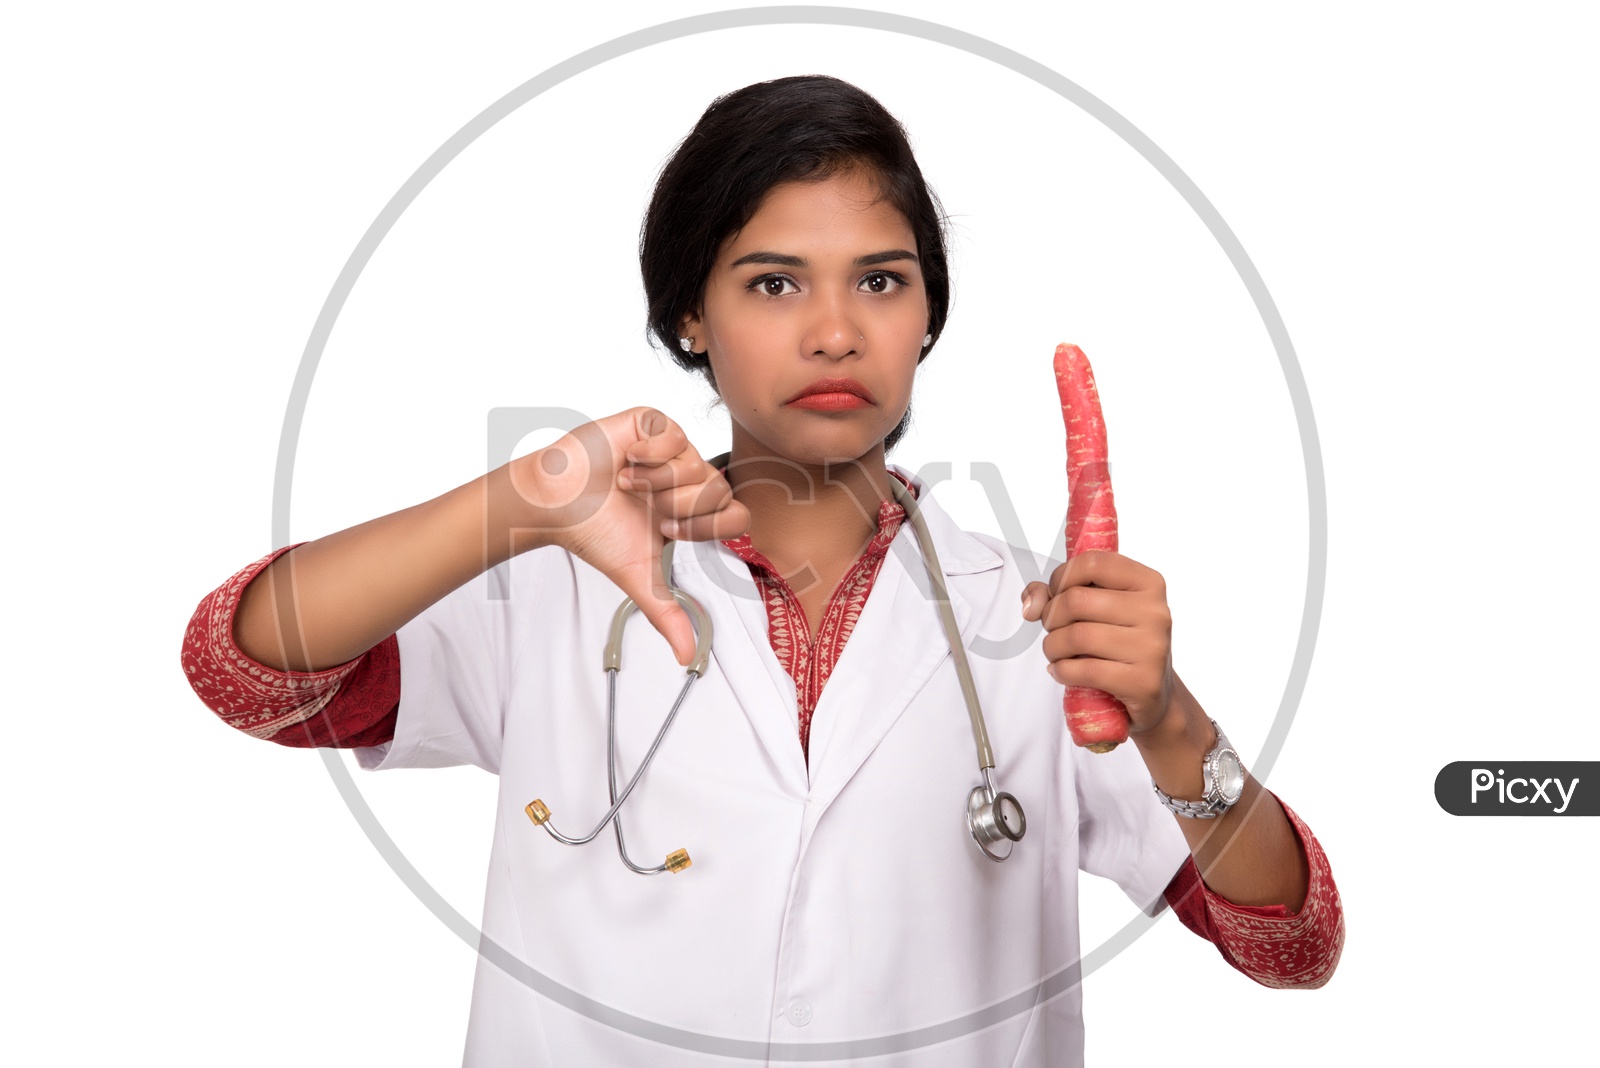 Indian Female Doctor holding carrot making a thumbs down sign